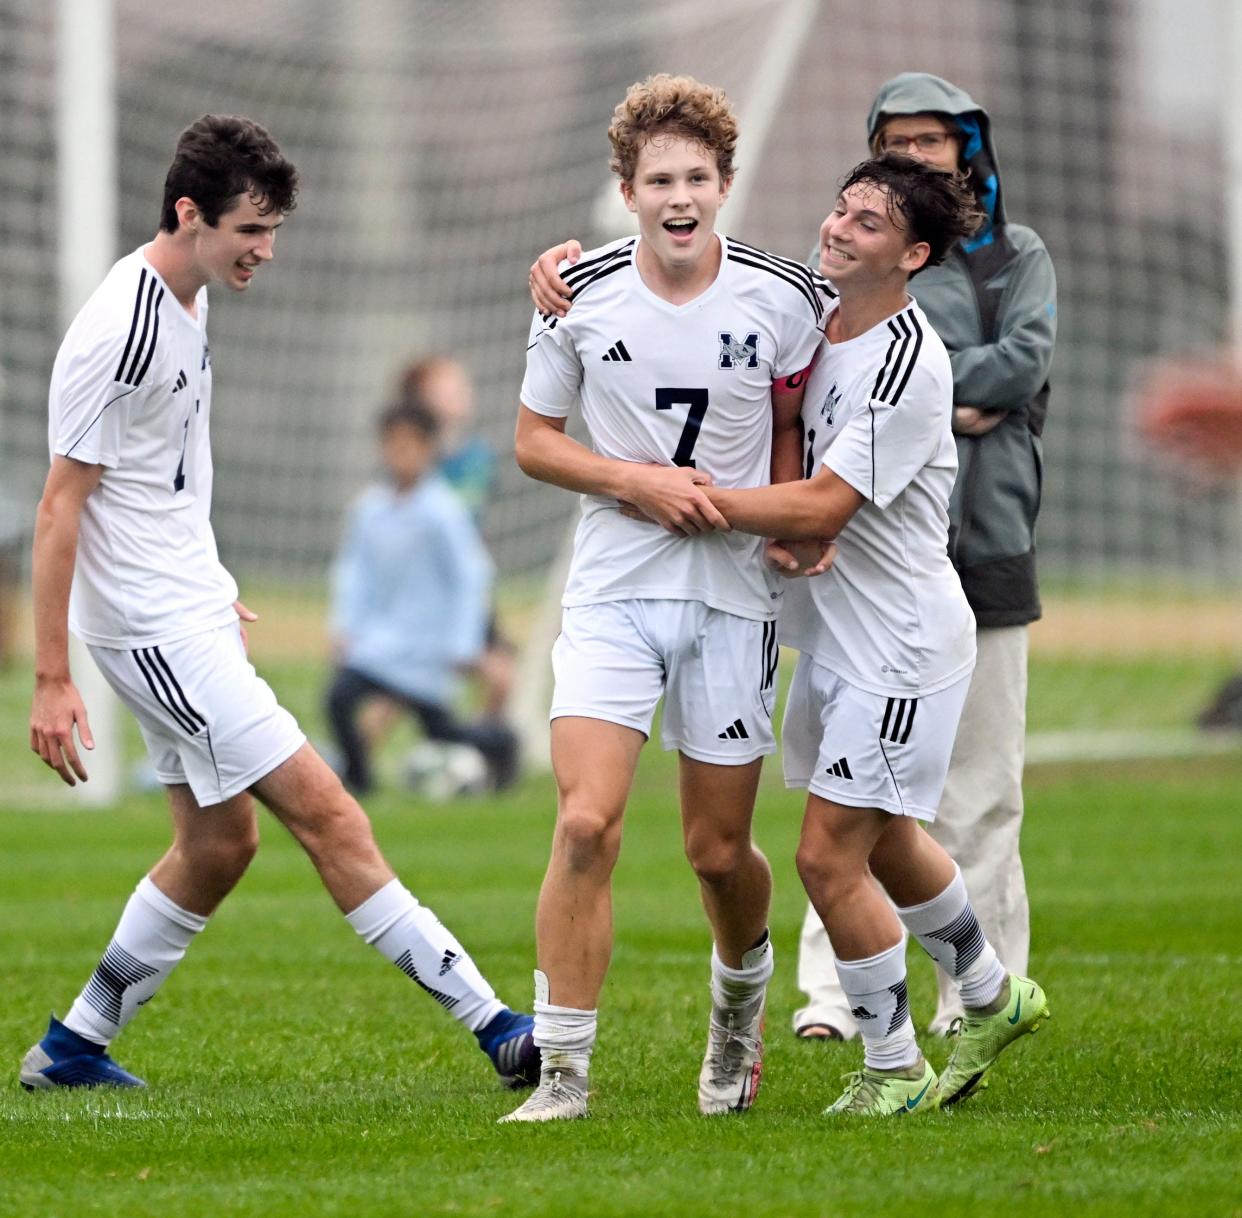 Ryan Laramee (center) is joined by his Monomoy teammates Greg Greiner (right) and Stephen Kelly after scoring his second and winning goal against Dennis-Yarmouth.